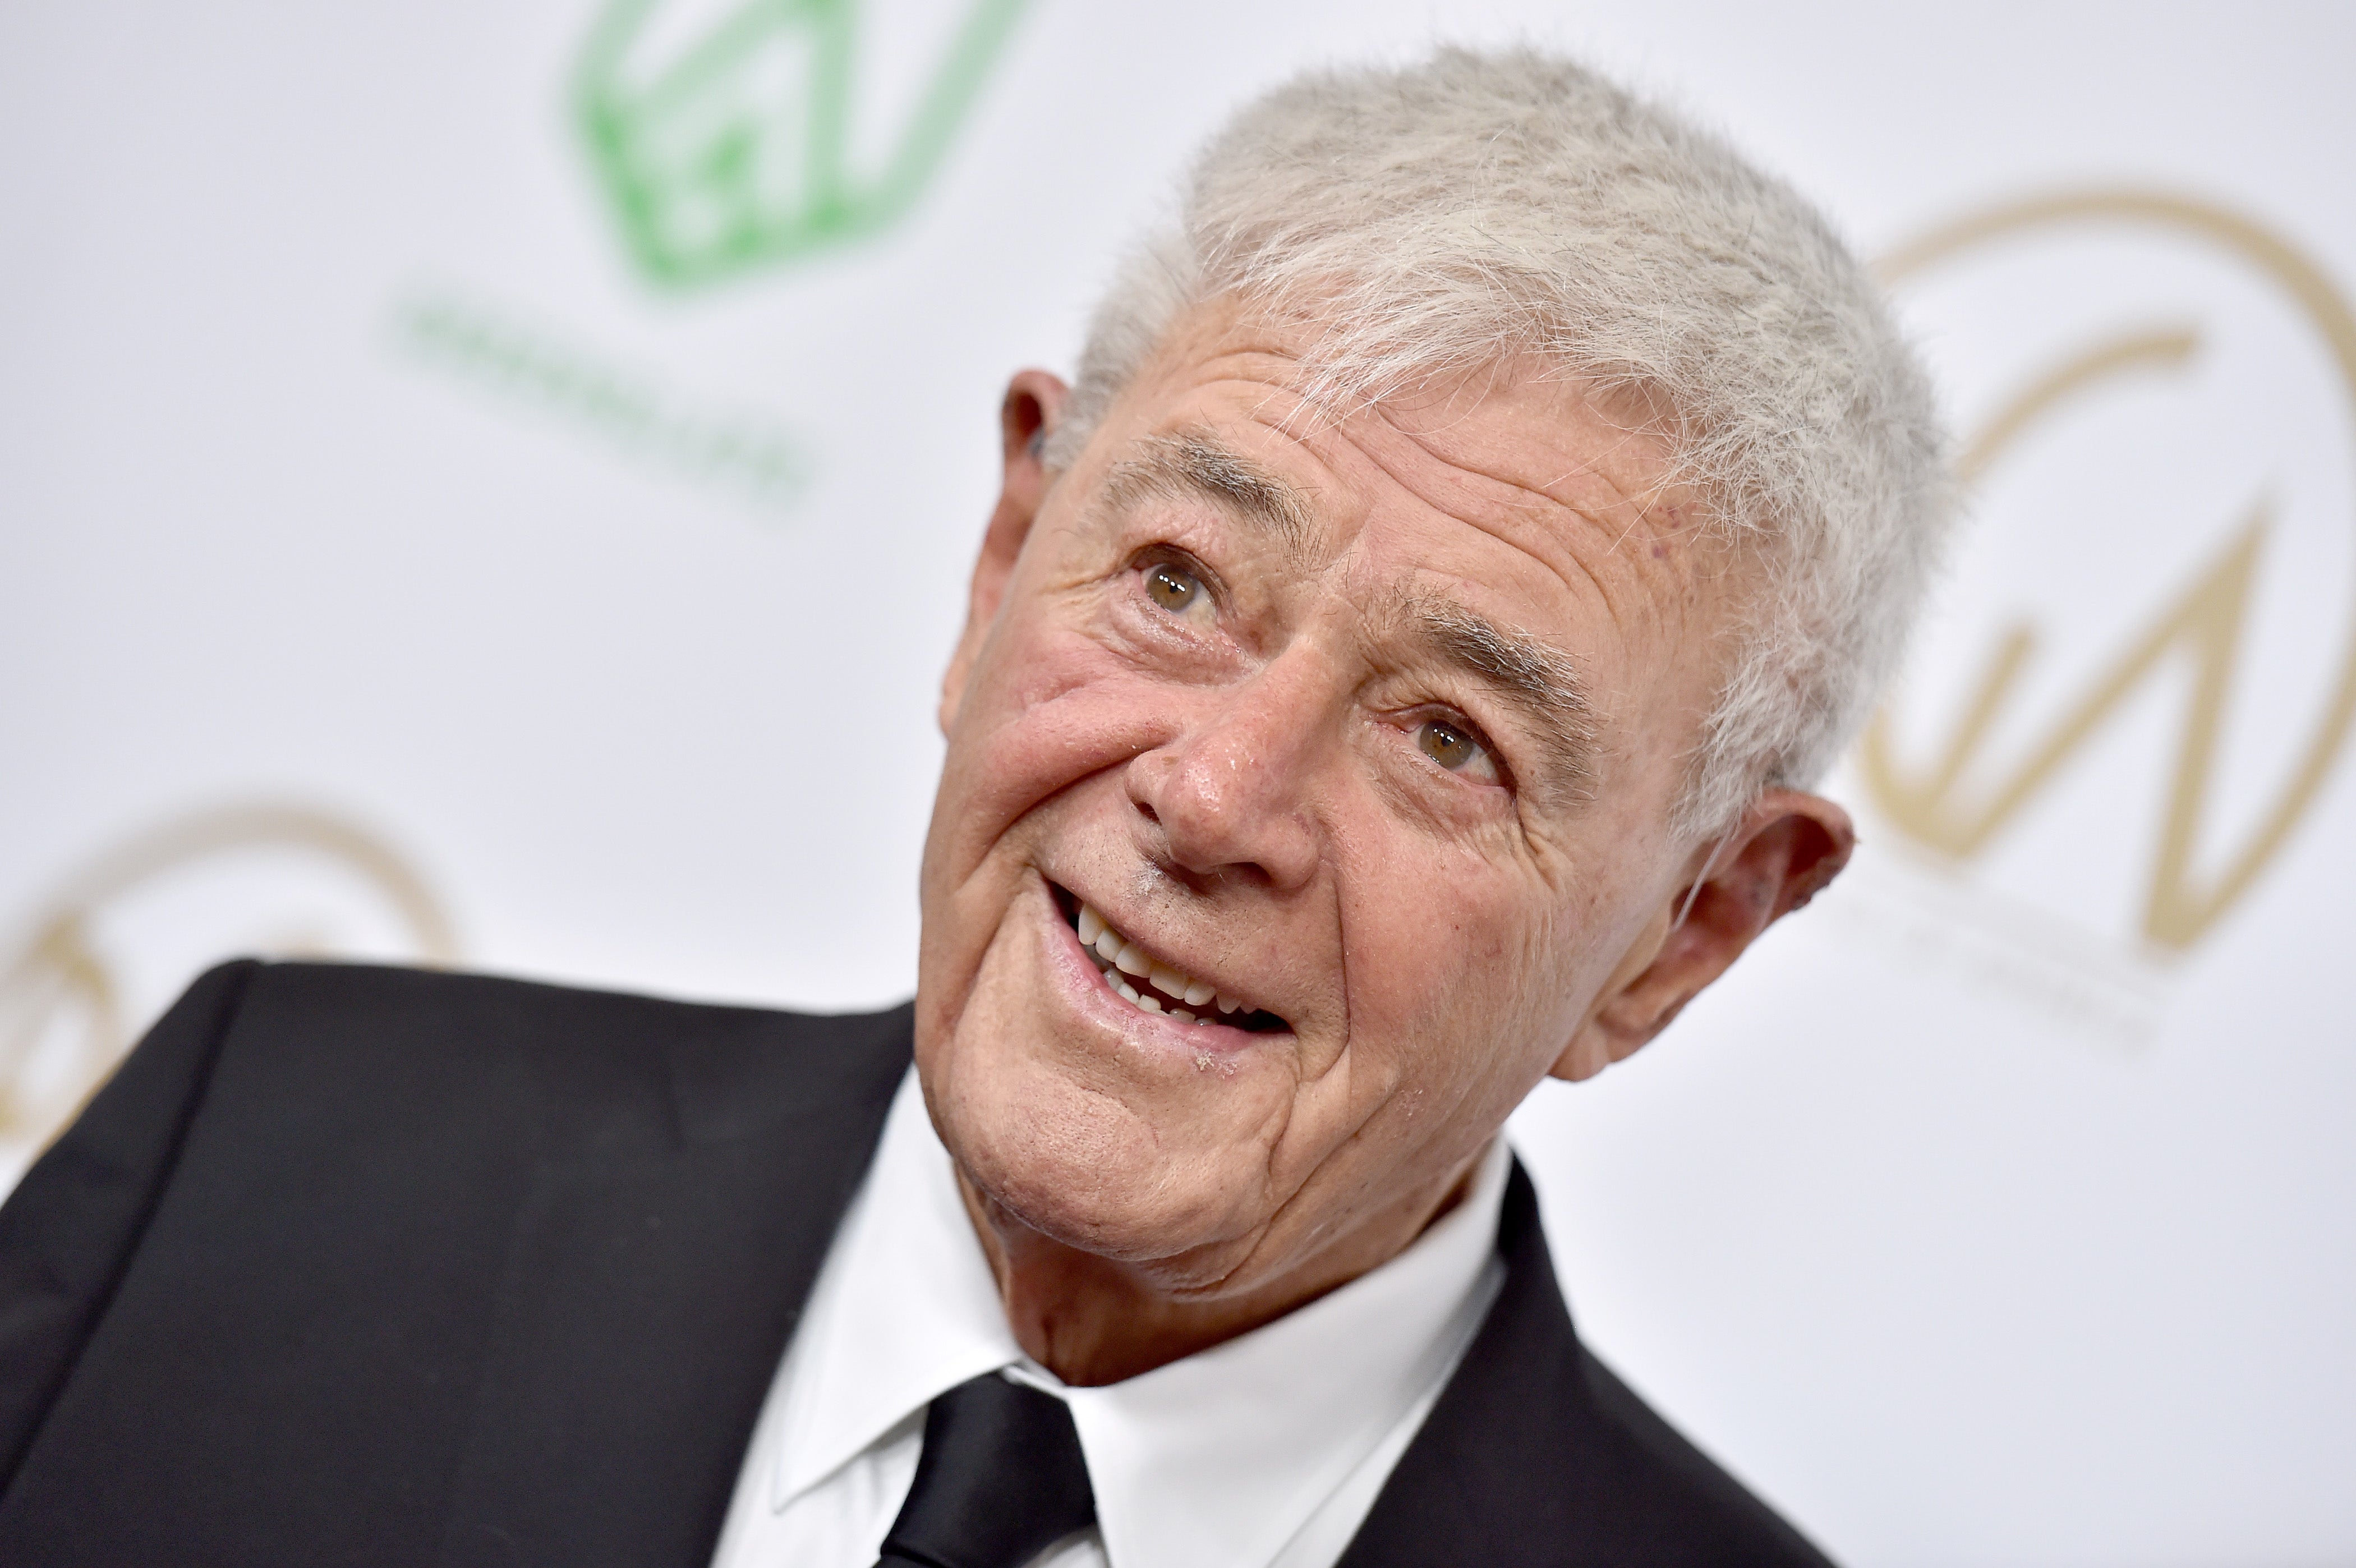 Director Richard Donner of 'Lethal Weapon,' 'Goonies' fame, dead at 91